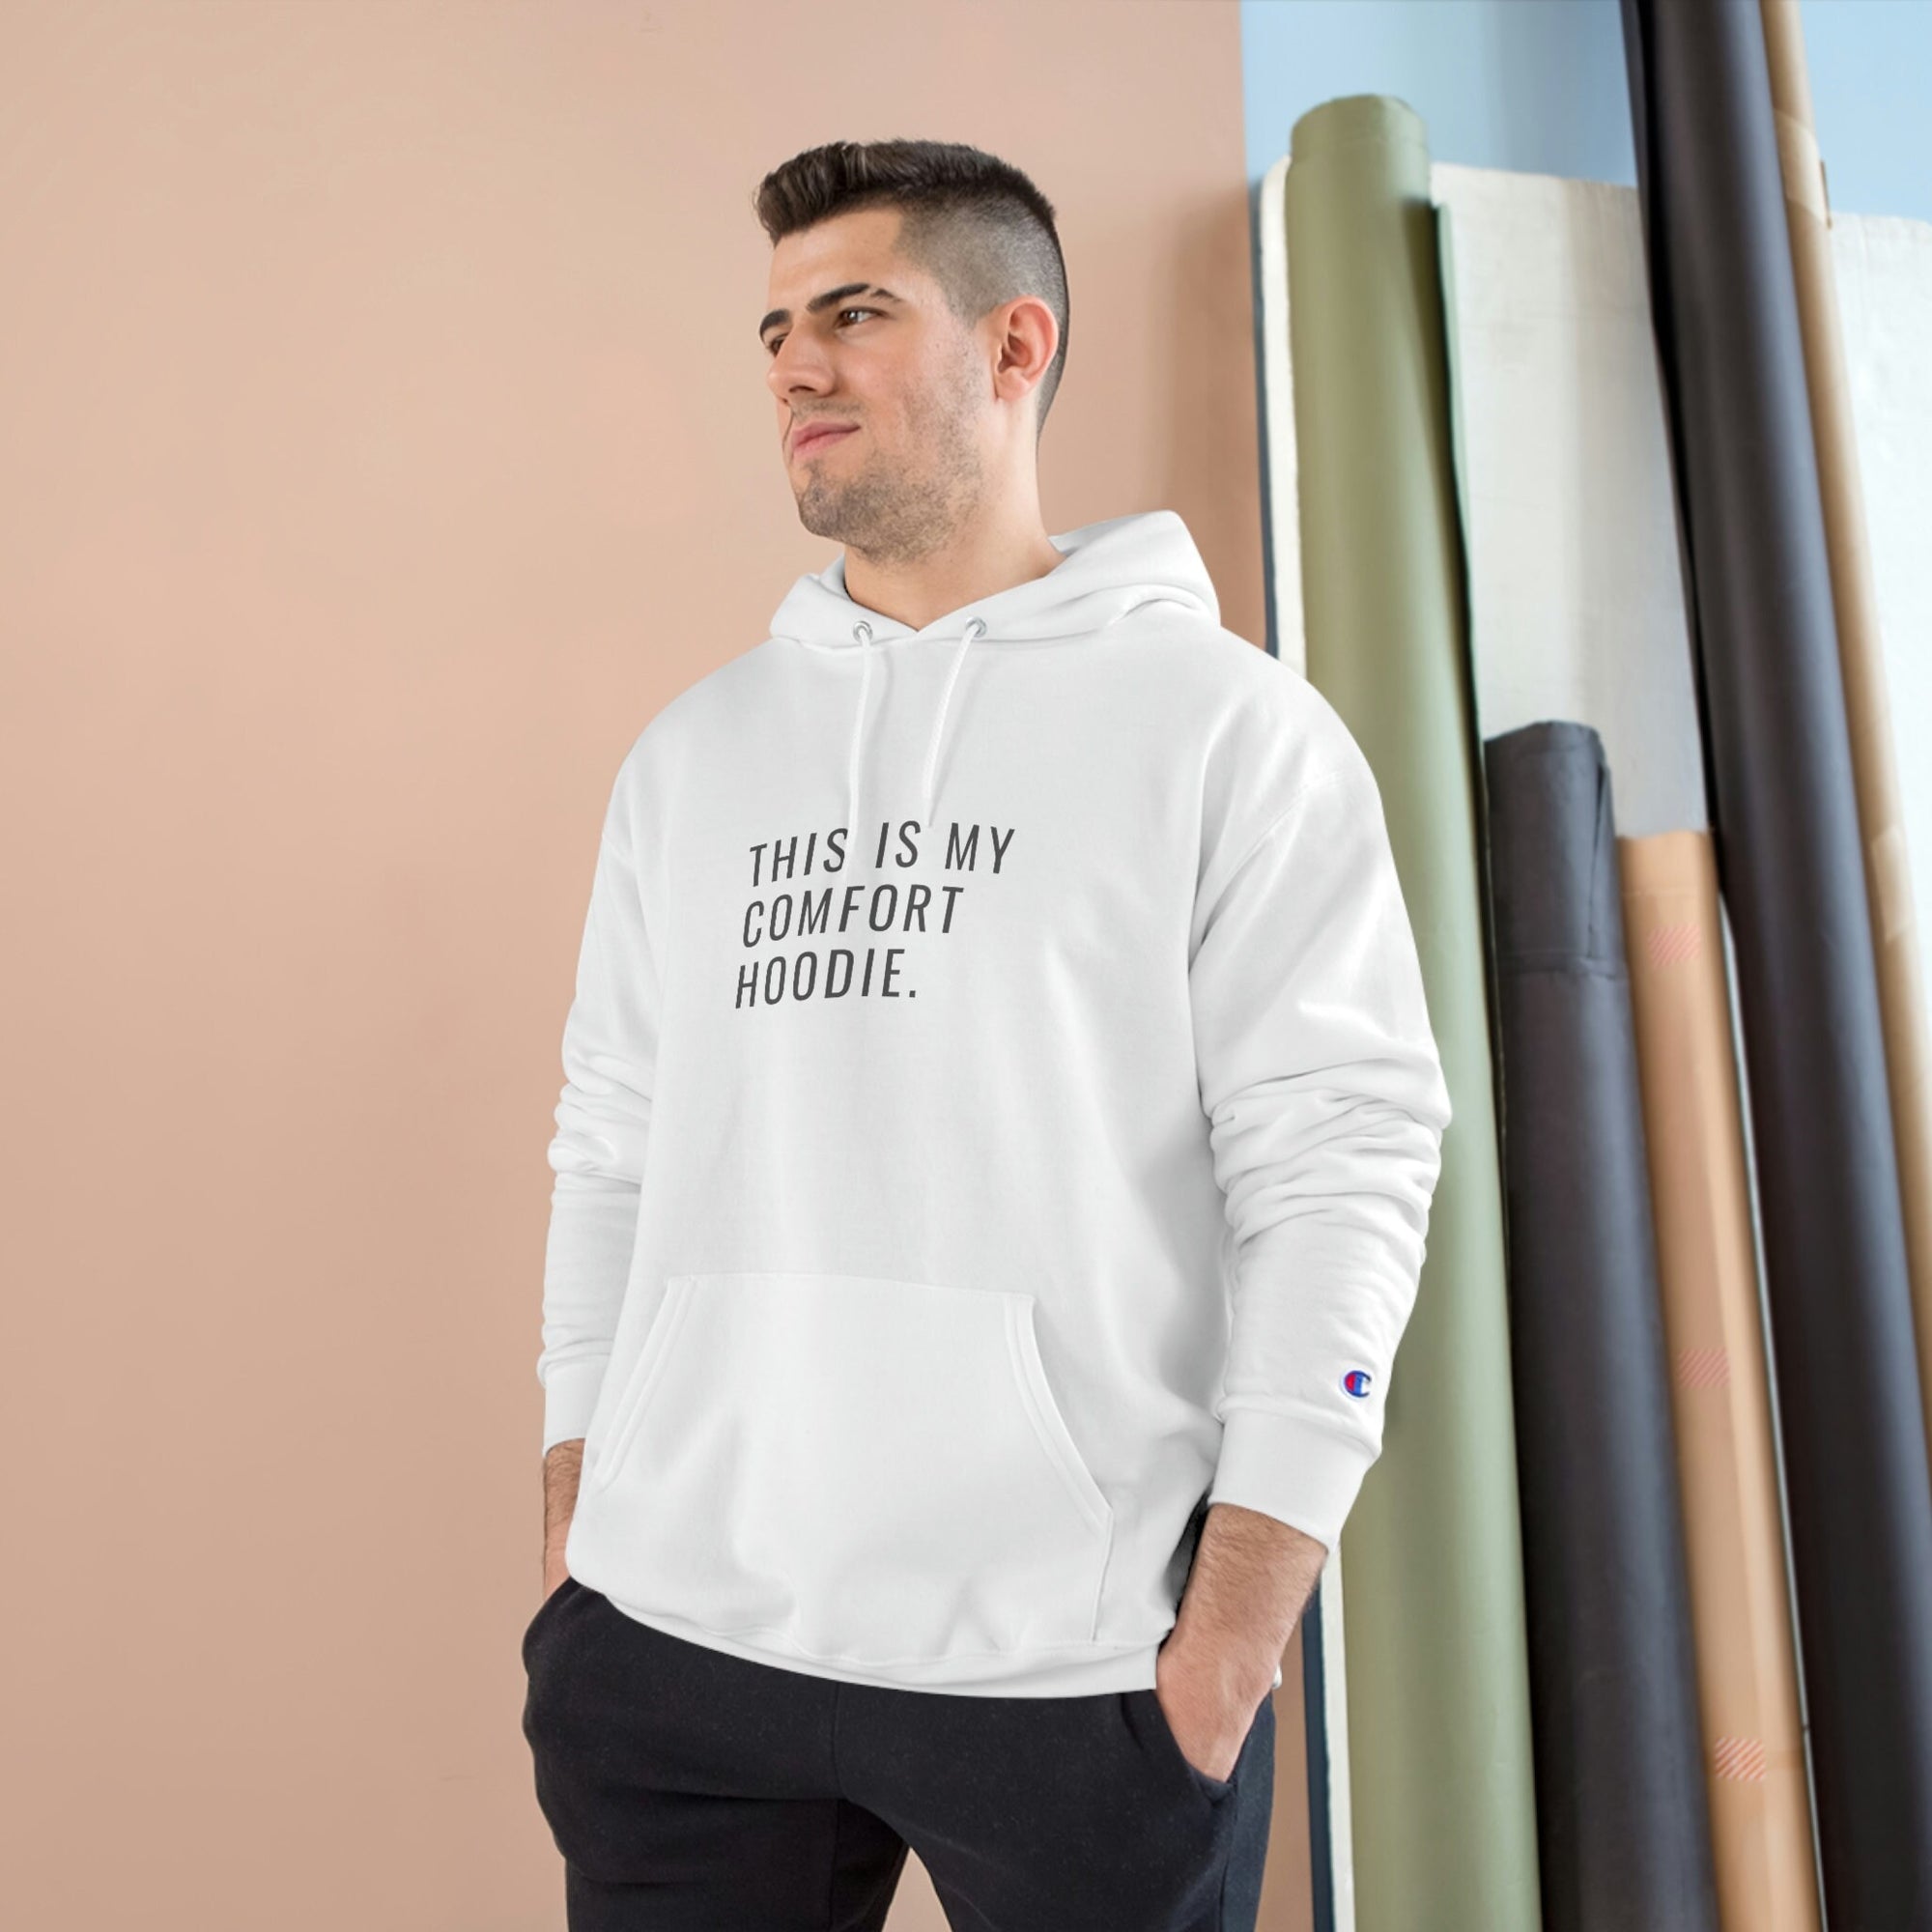 Discover The Comfort: This Is My Hoodie